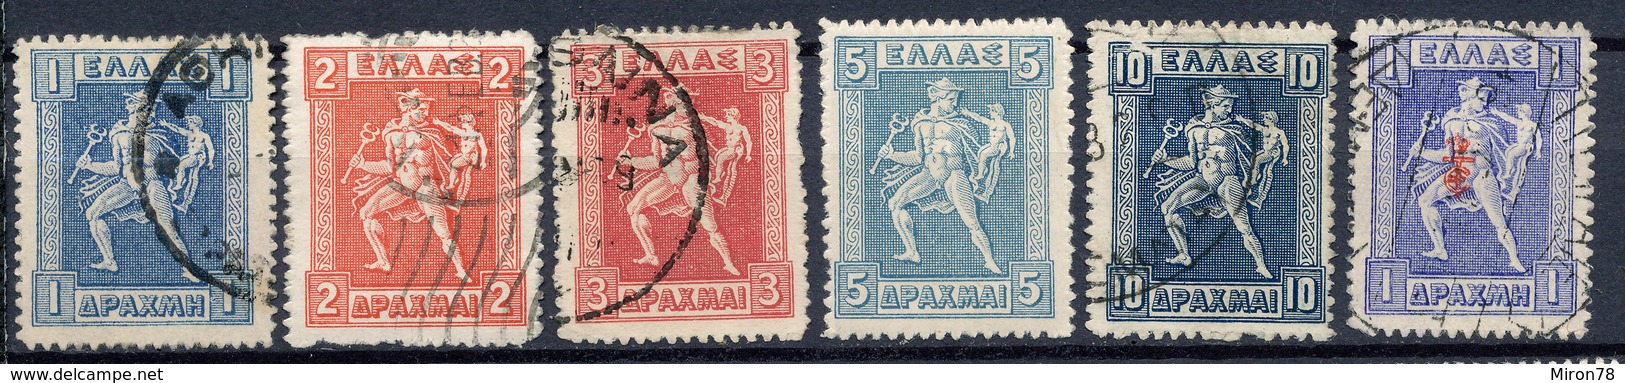 Stamp Greece 1911-13  Used  Lot#2 - Used Stamps